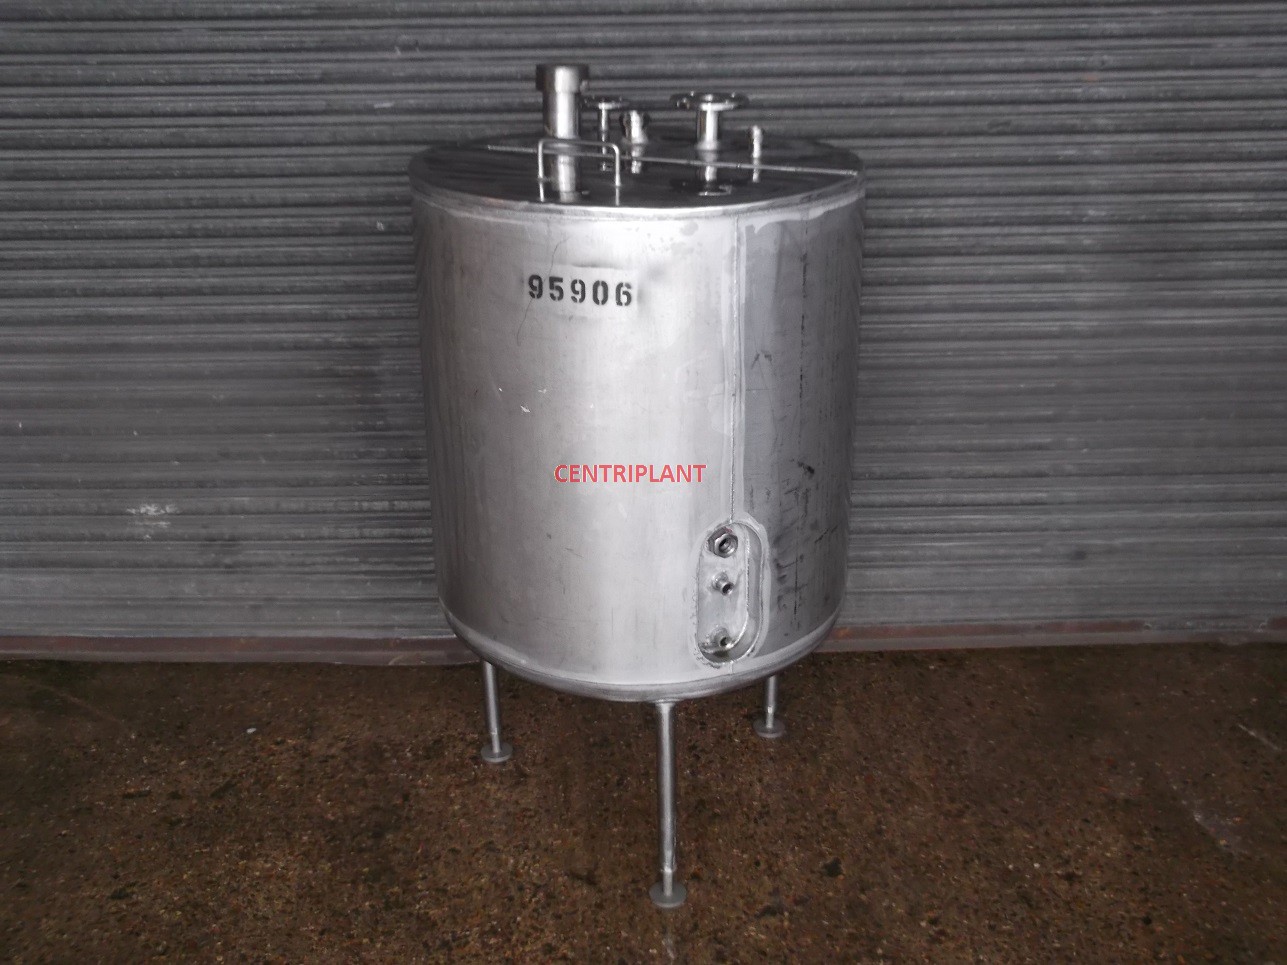 95906 - 390 LITRE STAINLESS STEEL OPEN TOP TANK, INSULATED AND CLAD, ST/ST COIL.